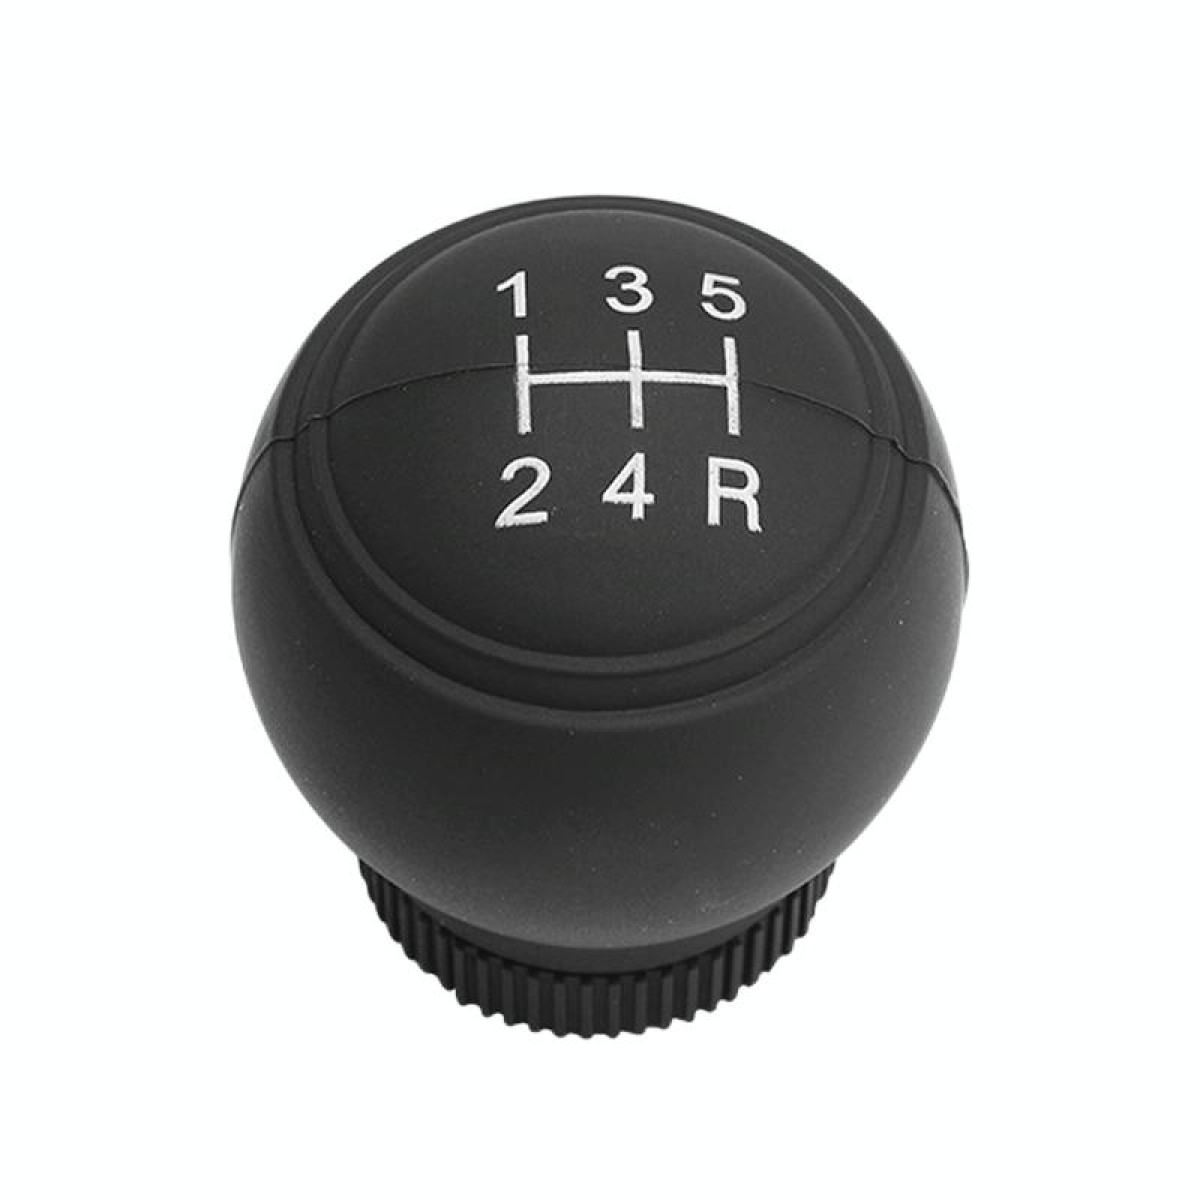 For Volkswagen 5-speed+R Car Silicone Dustproof Shift Knob Gear Protective Cover(Black)